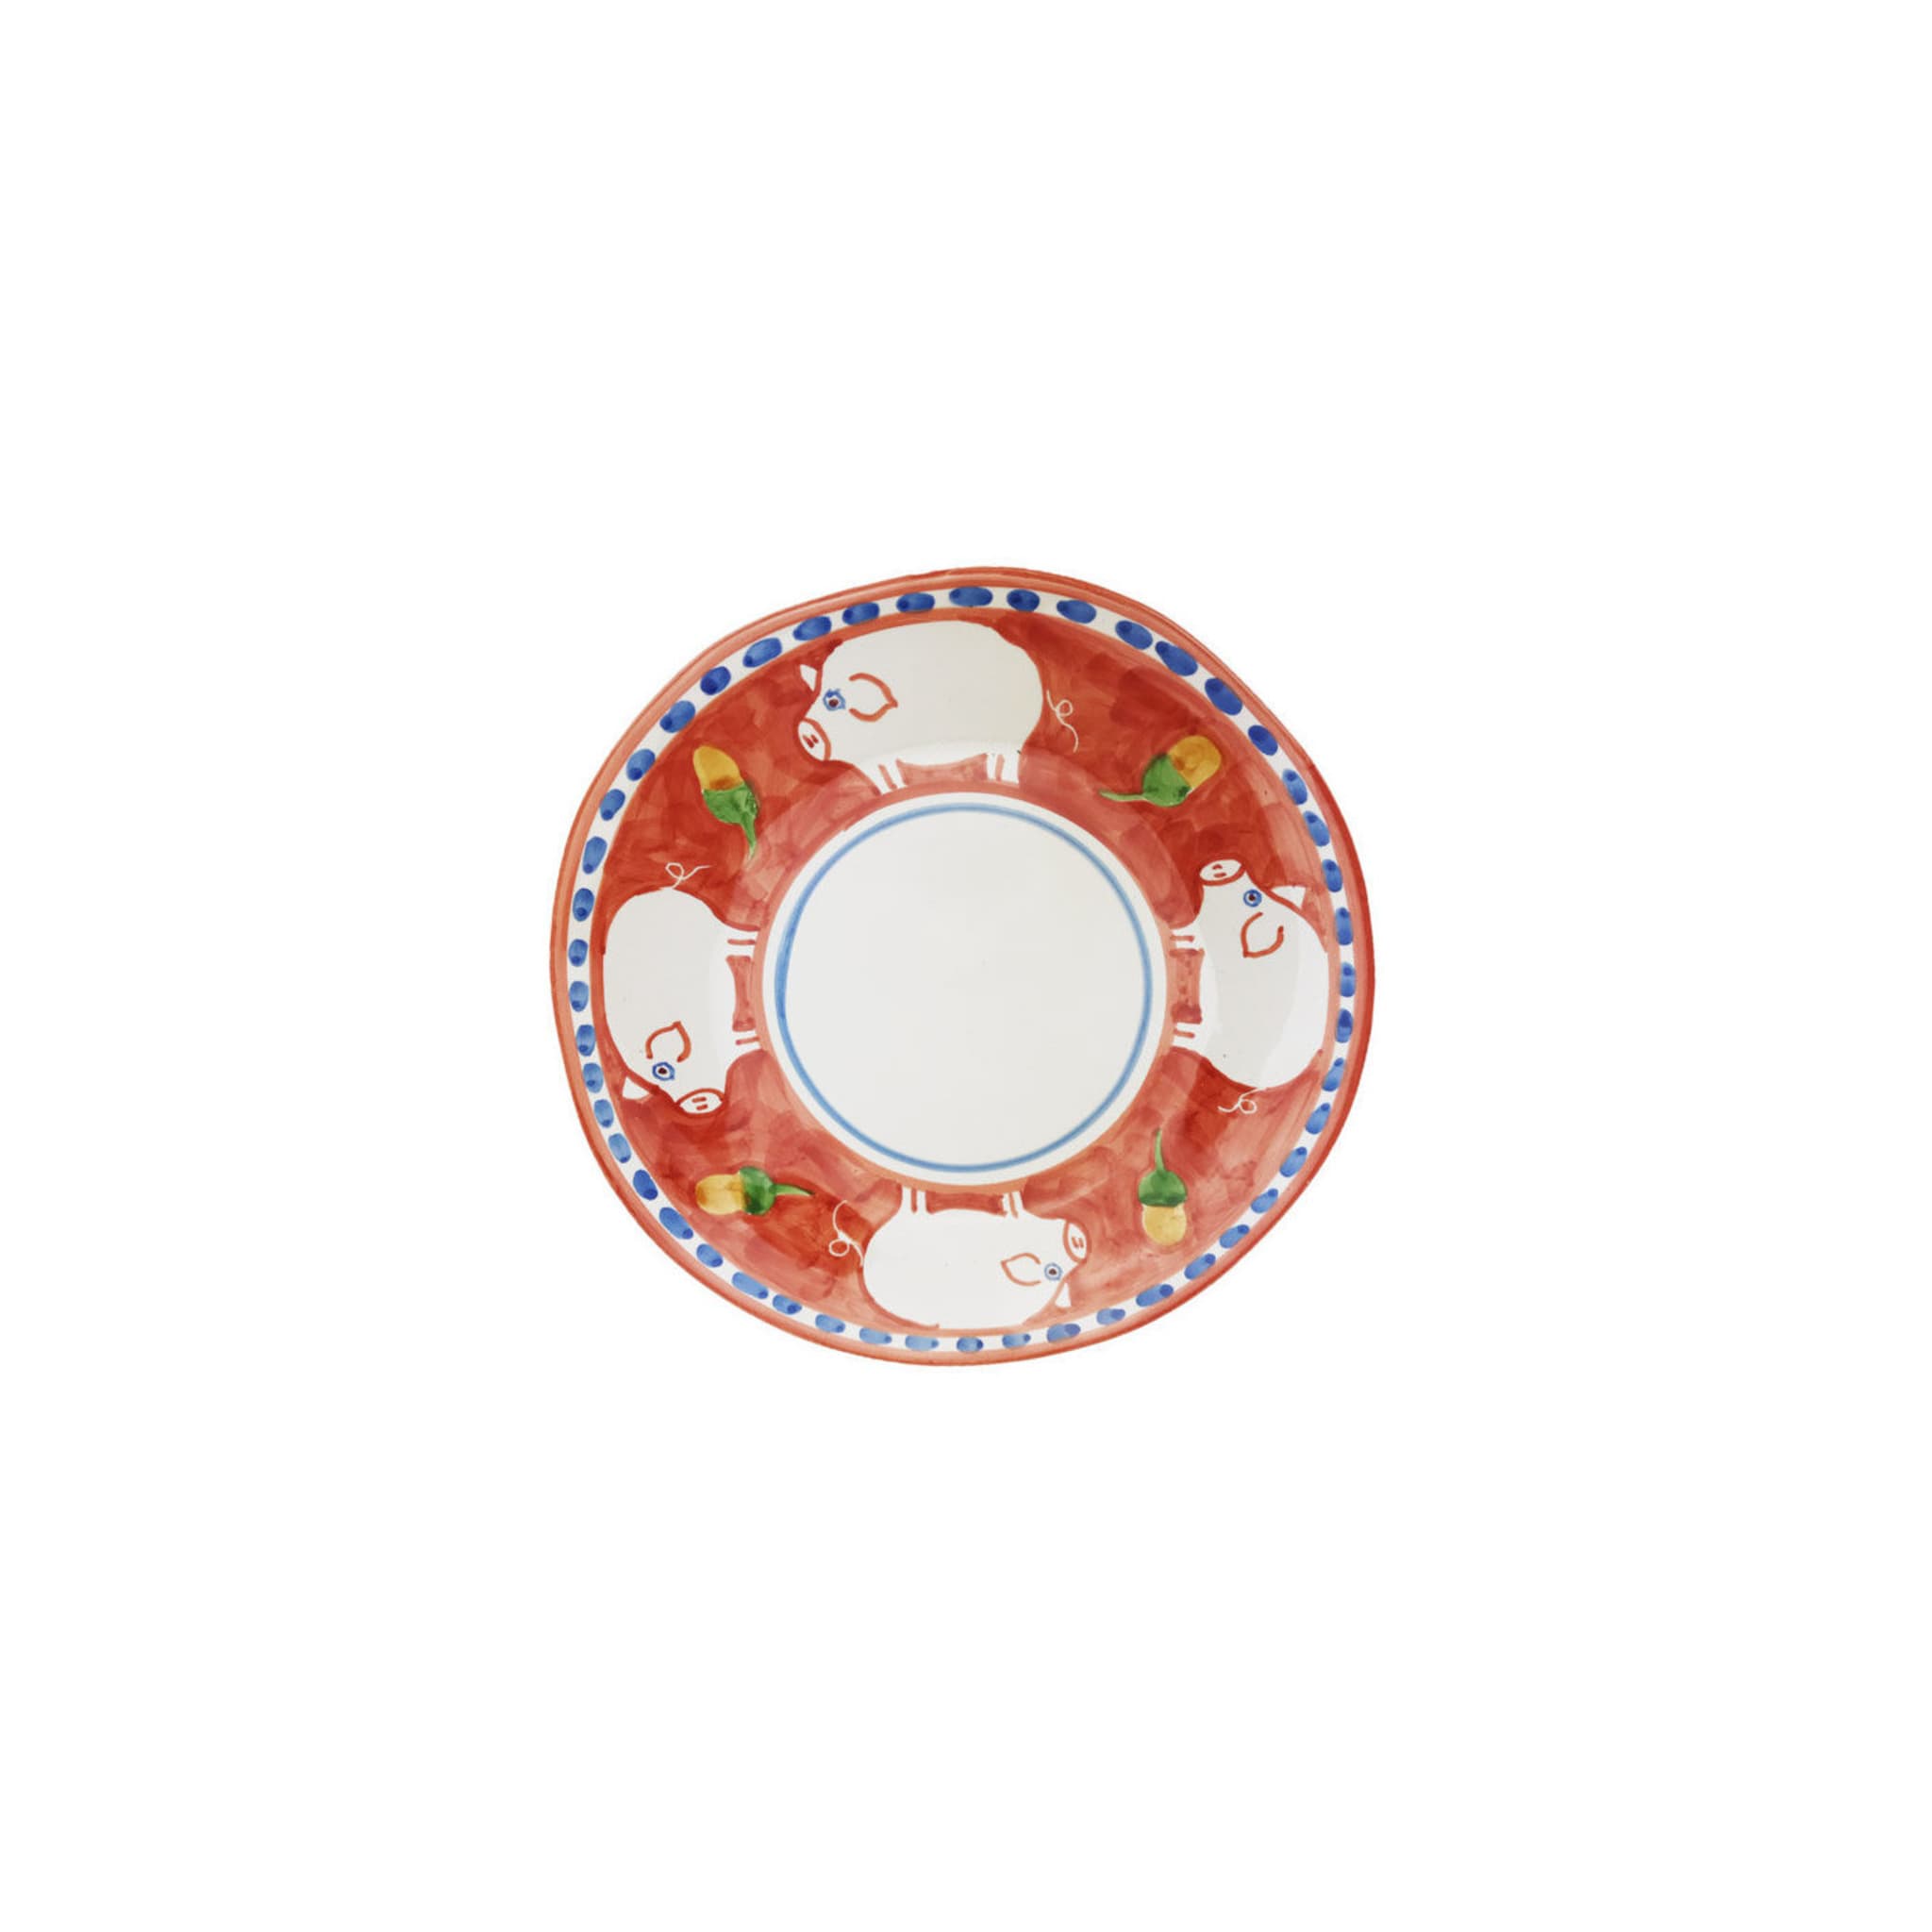 Cortile 18-Piece Red Plate Setting - Alternative view 2